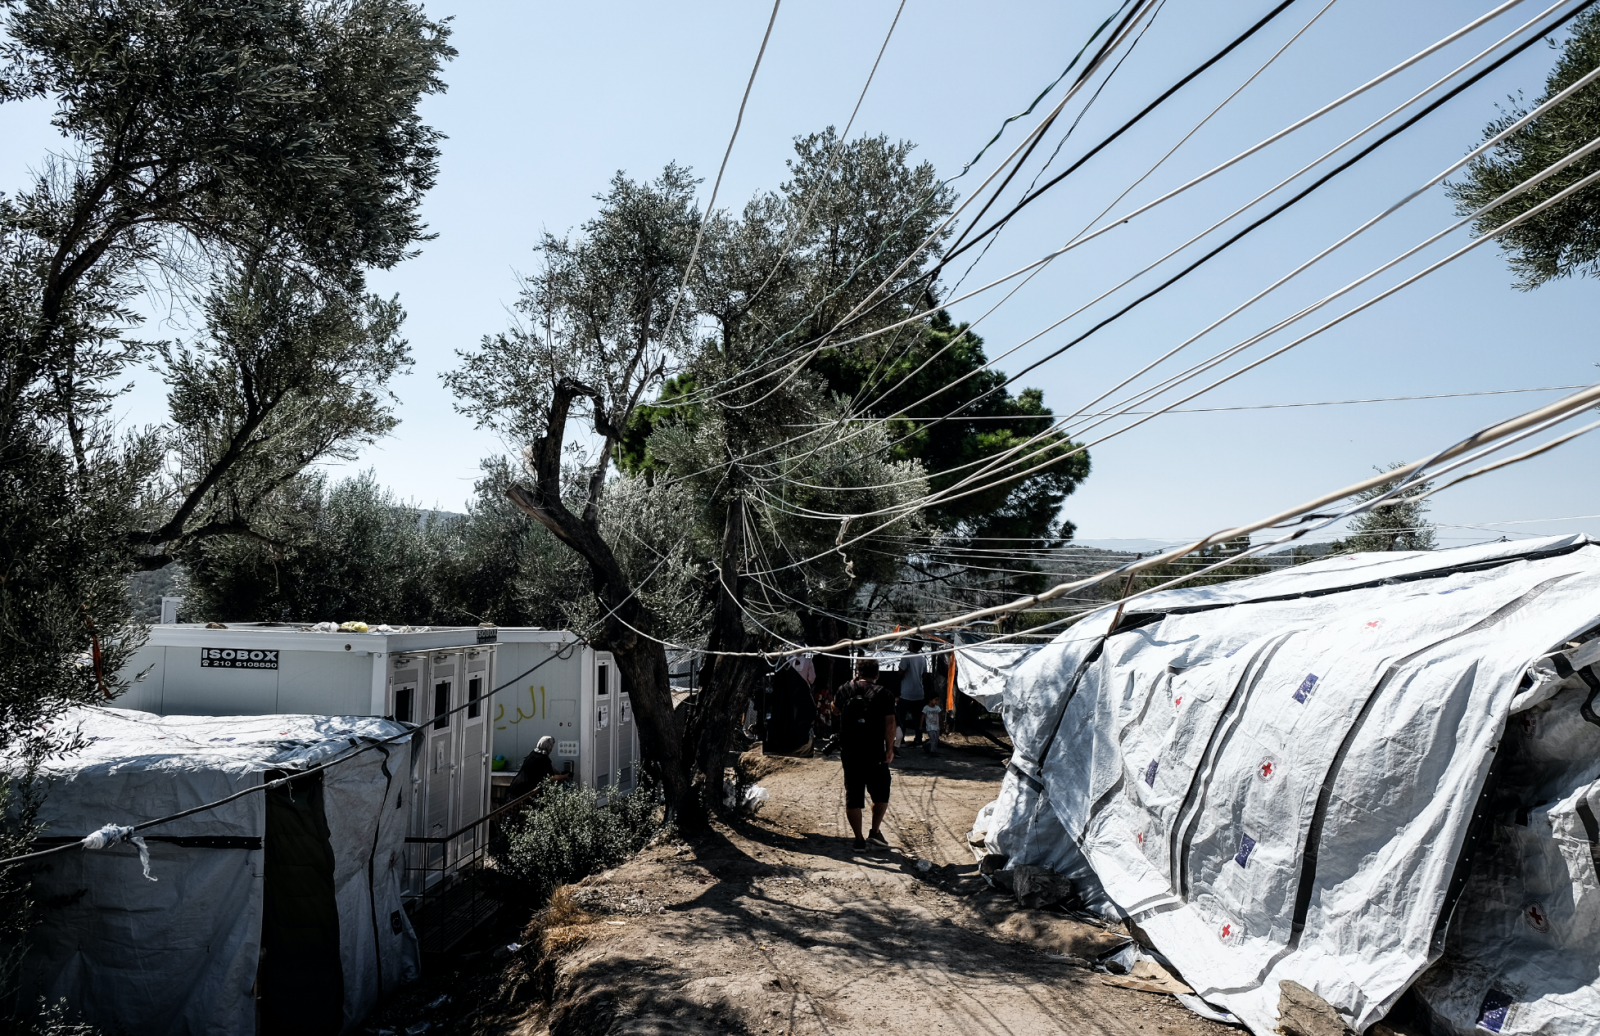 Reporting from Lesvos